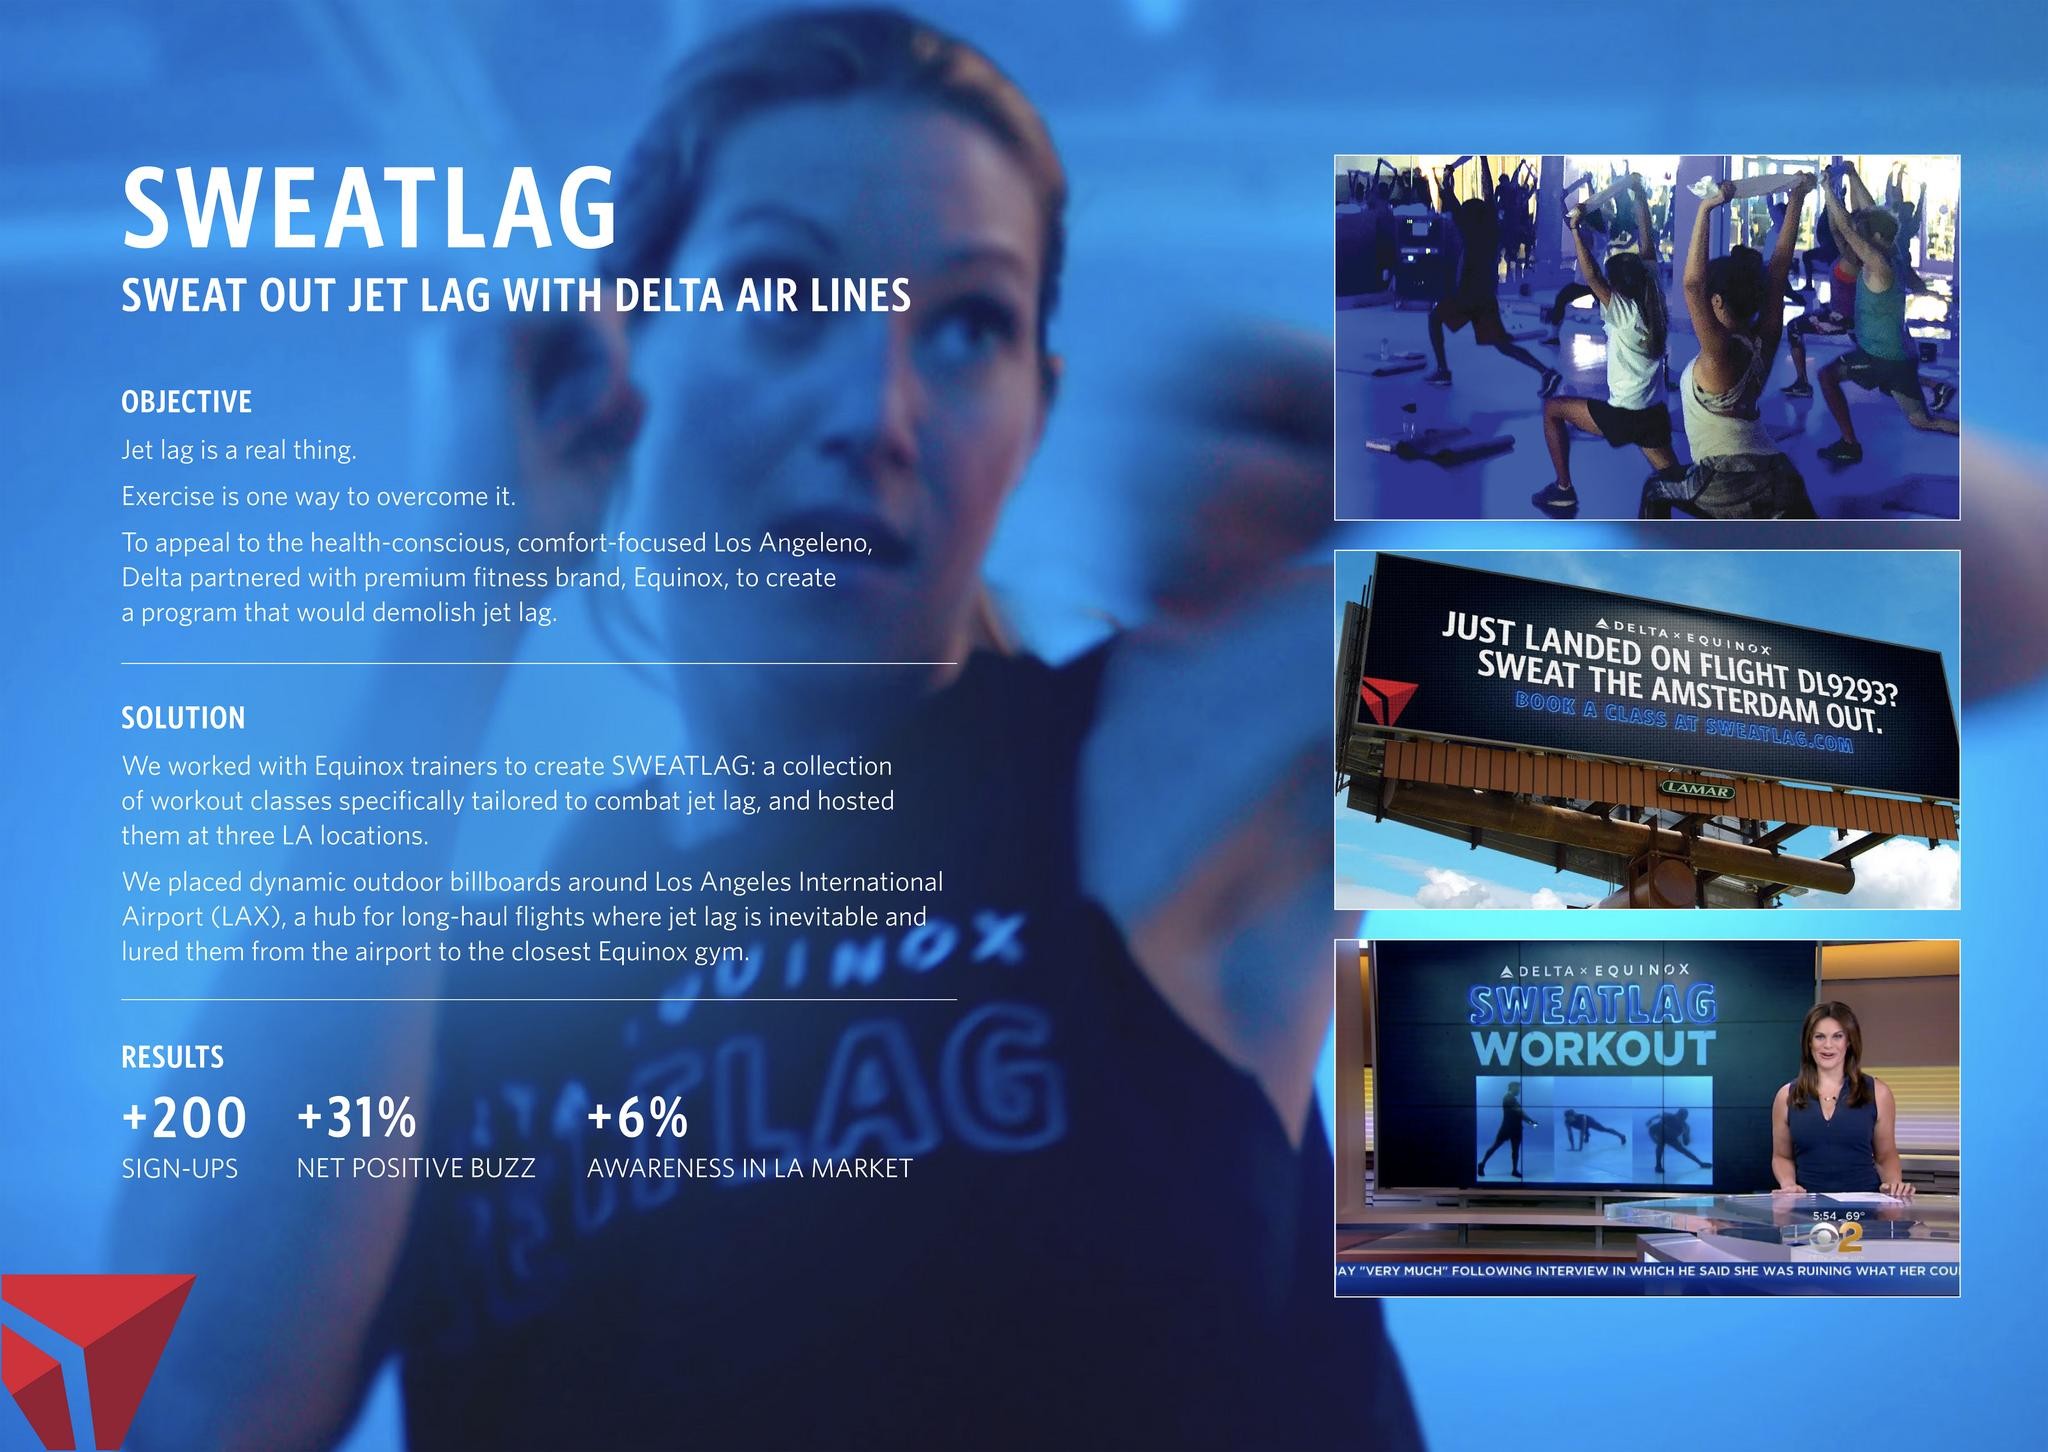 Sweatlag: Sweat Out Jet Lag With Delta Air Lines